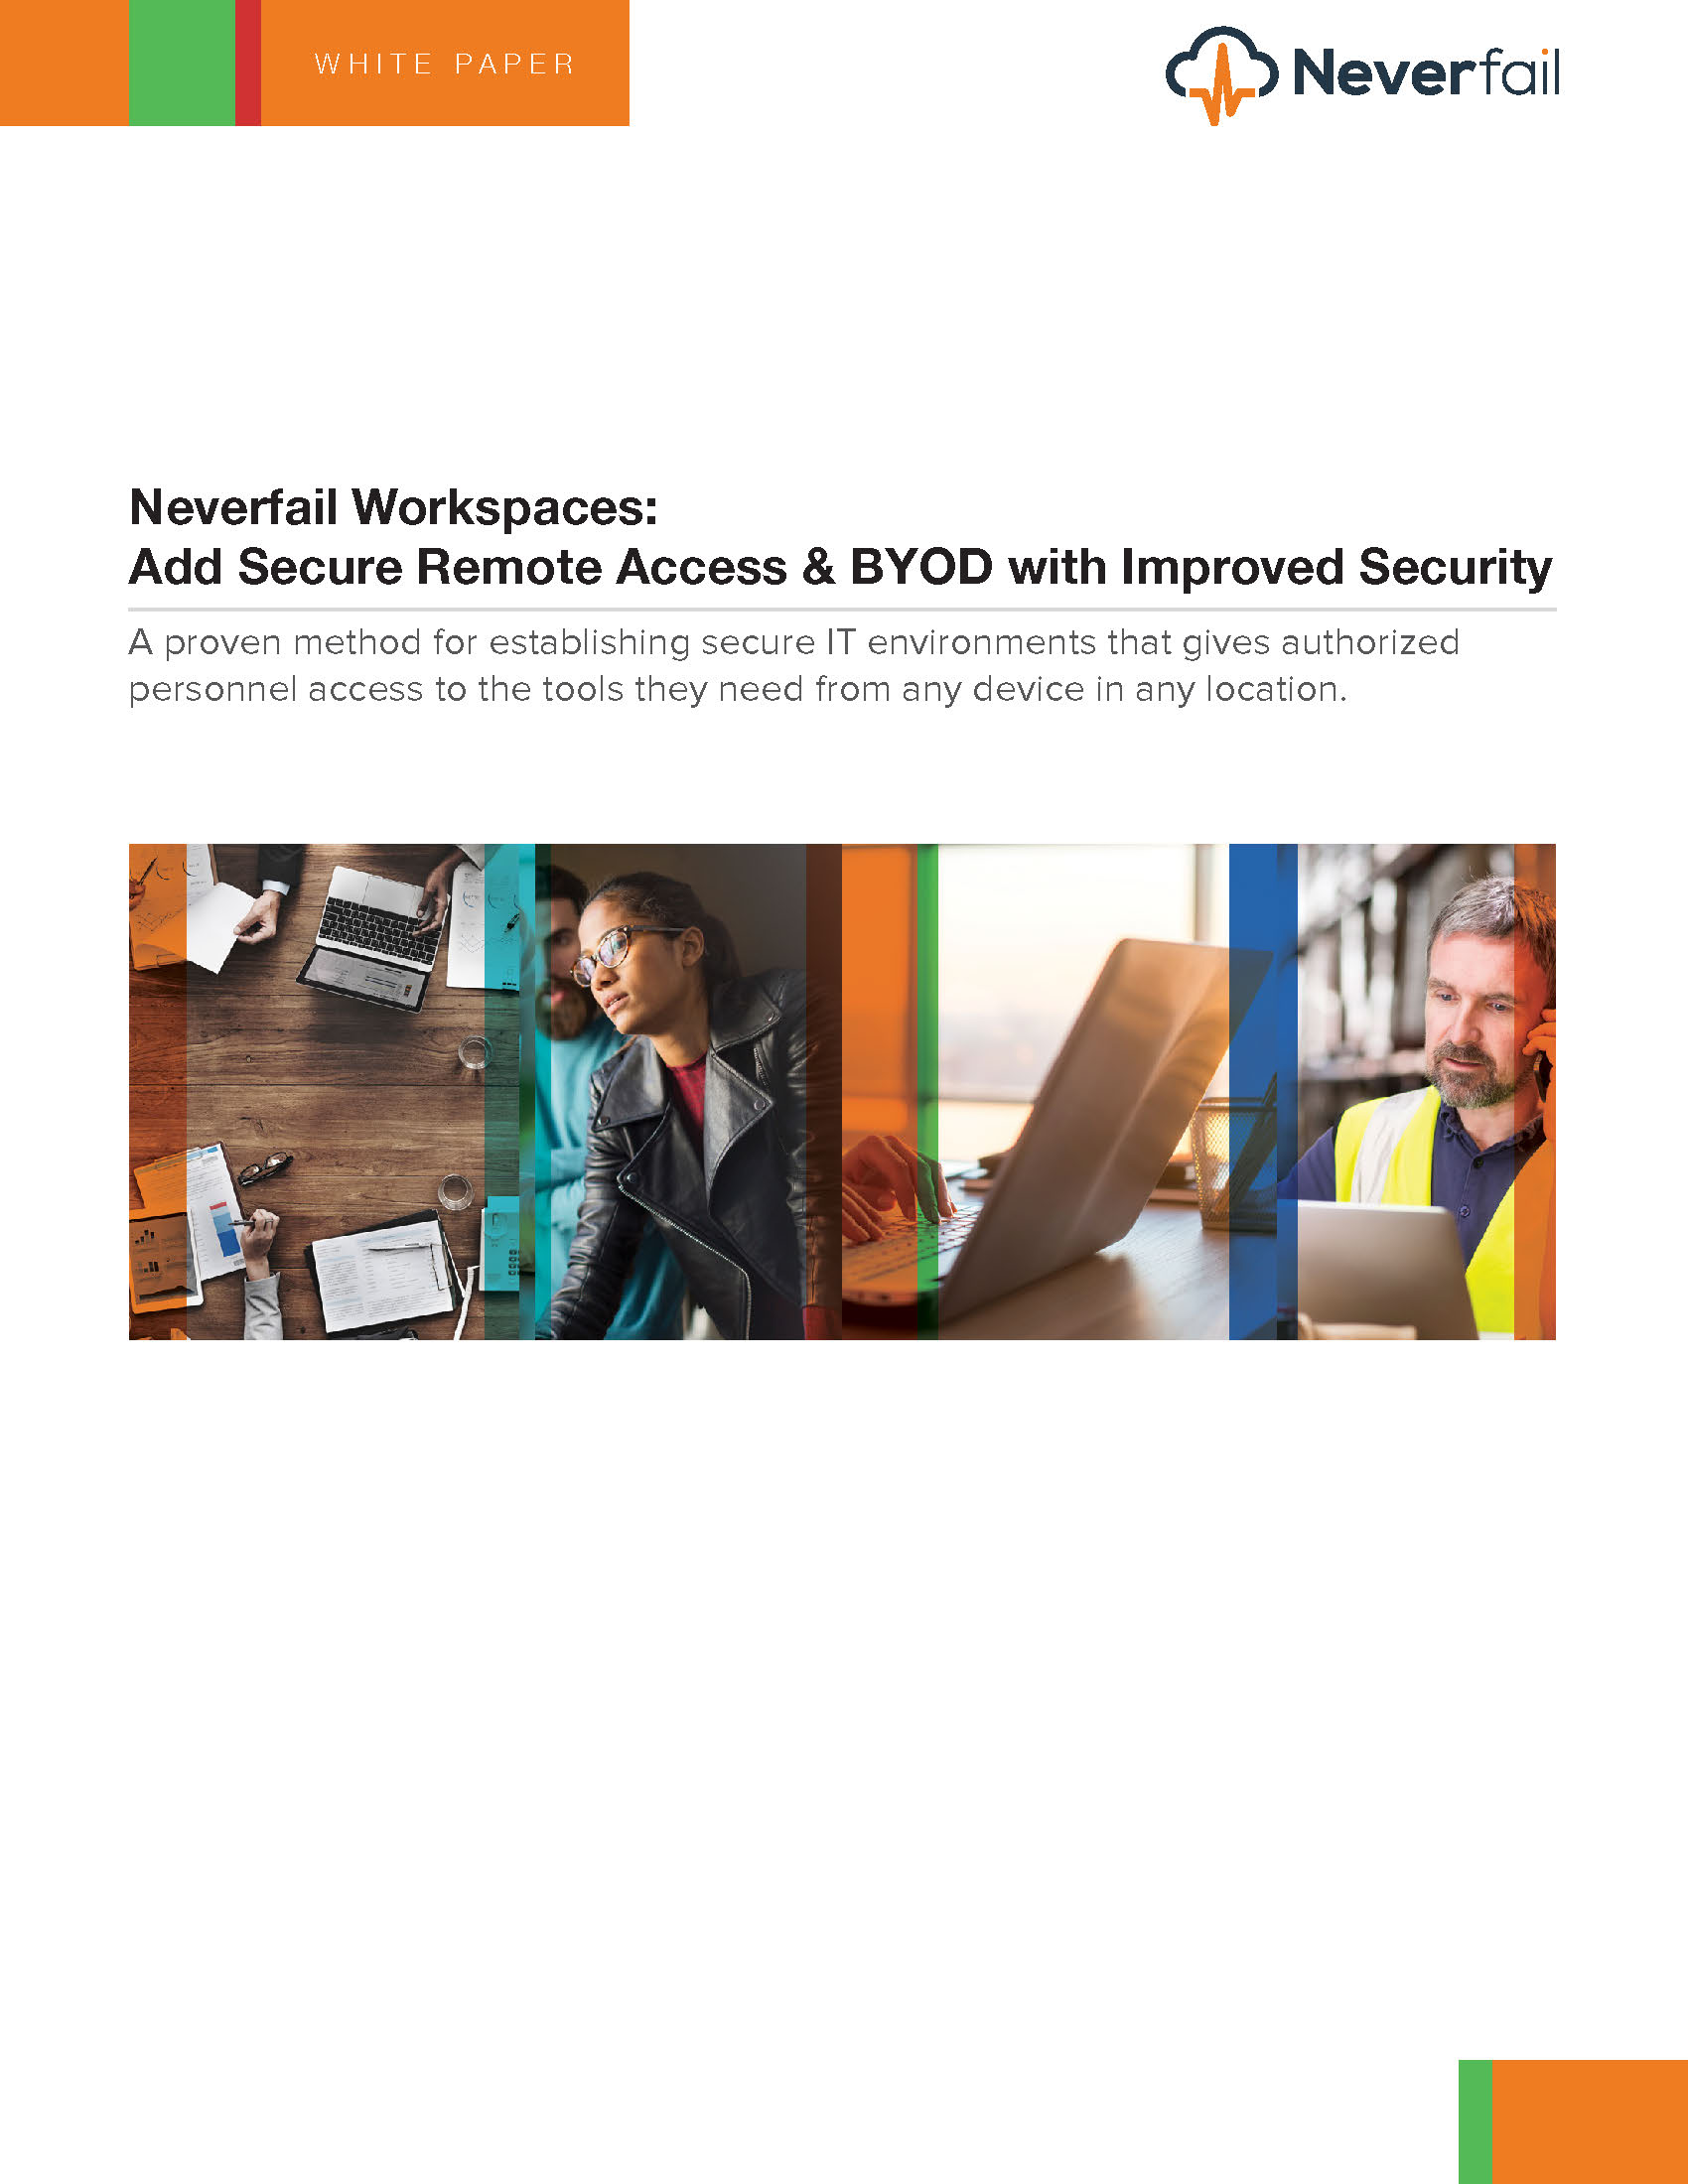 Neverfail Workspaces: Add Secure Remote Access & BYOD with Improved Security